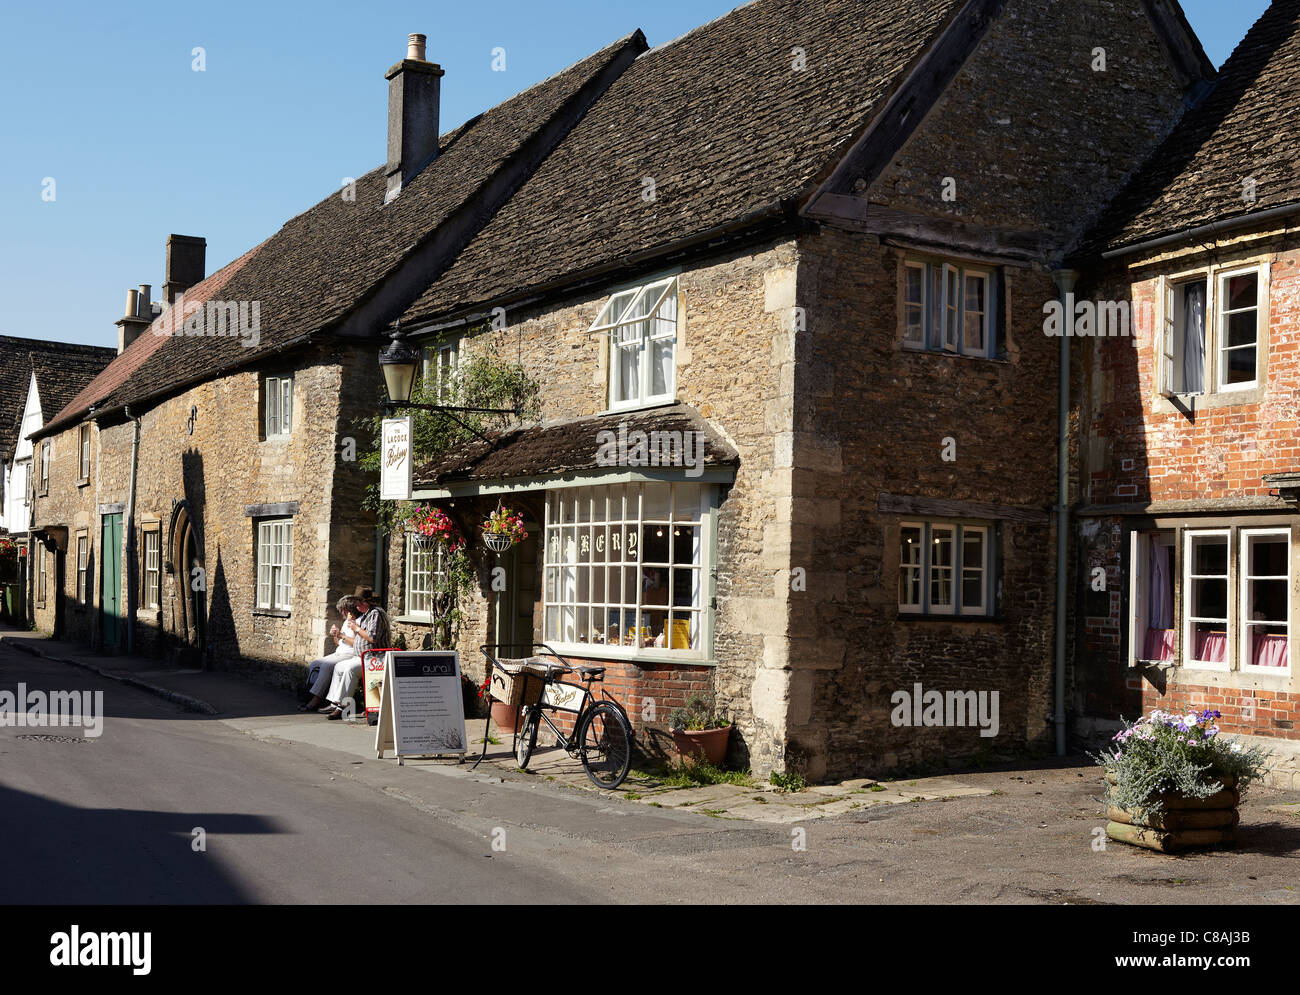 Two tourists eating ice creem outside the Tea Room, Lacock Village, Wiltshire, England UK Stock Photo